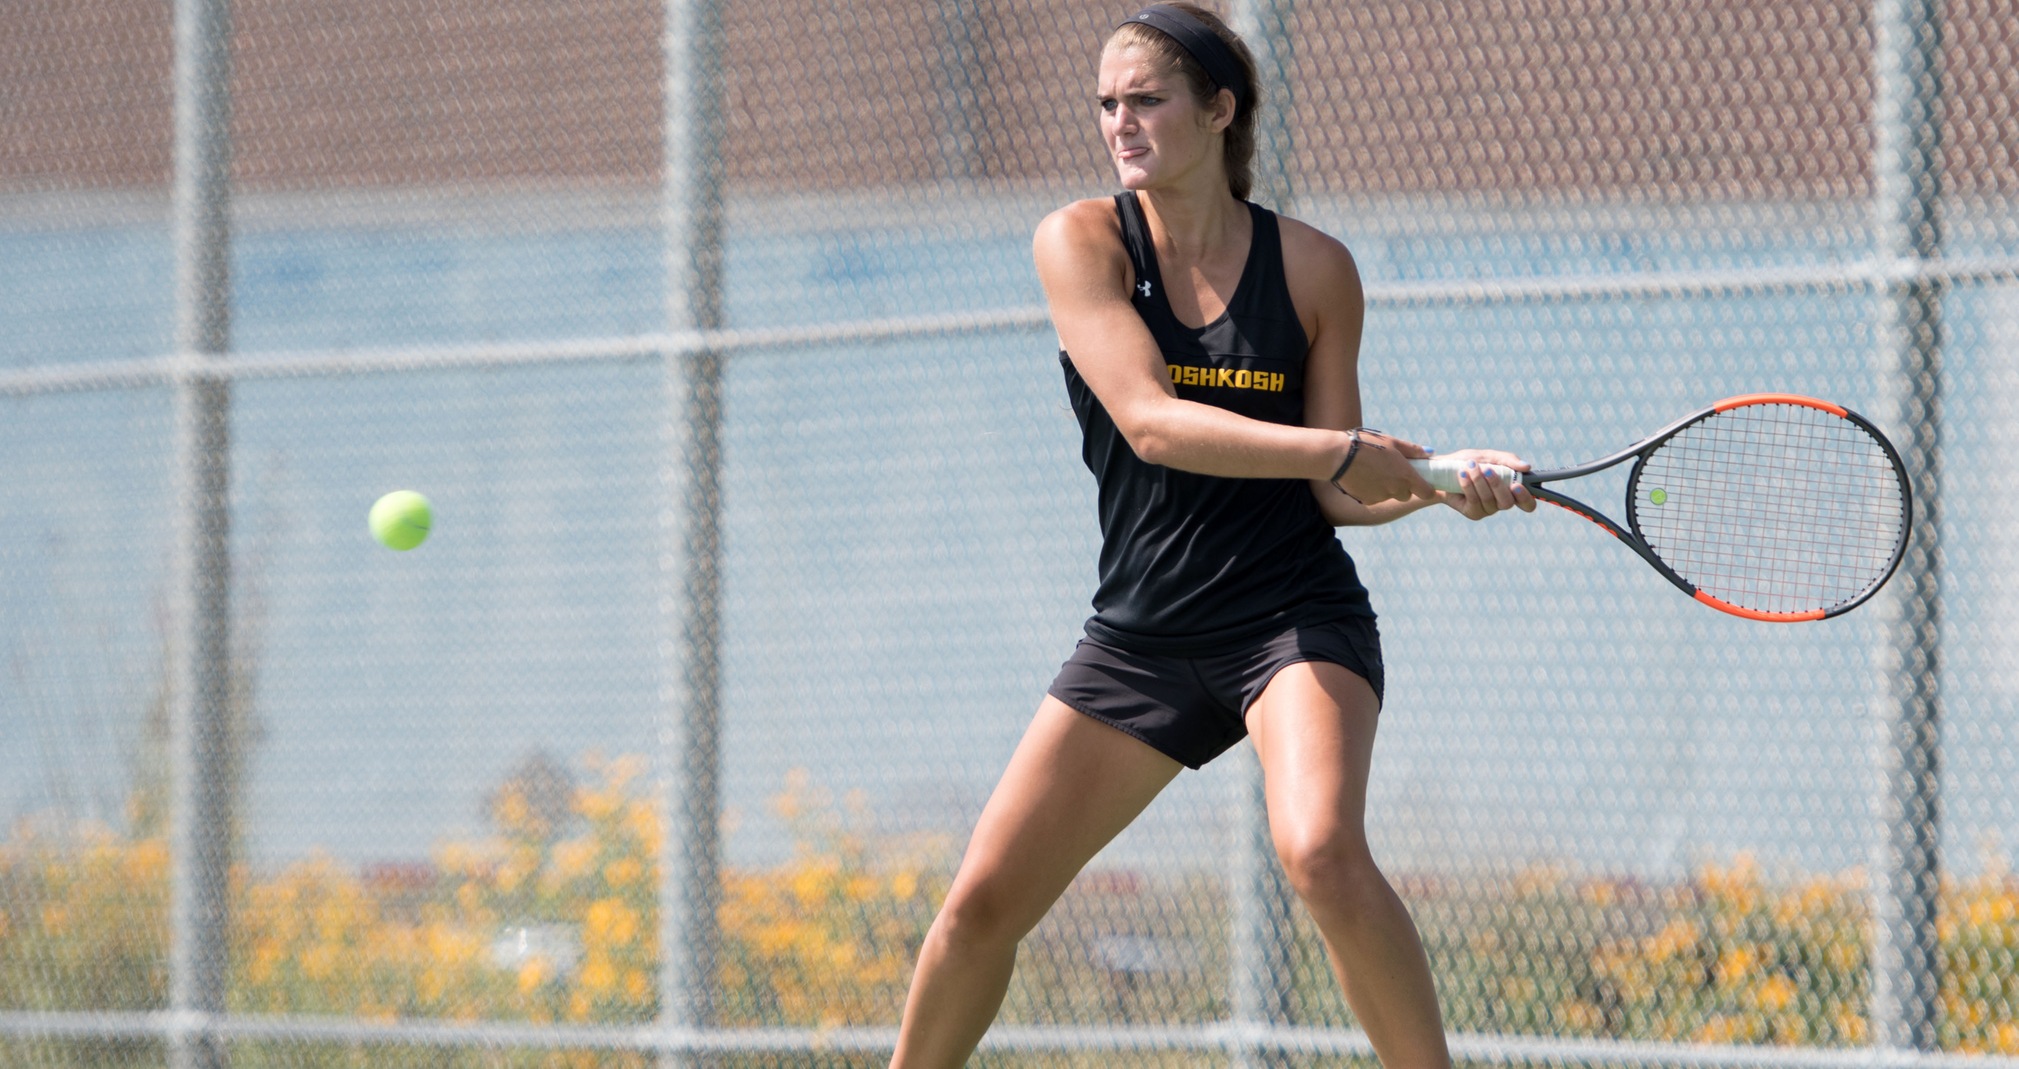 Alyssa Leffler won at No. 2 singles and at No. 2 doubles for the Titans against St. Norbert College.